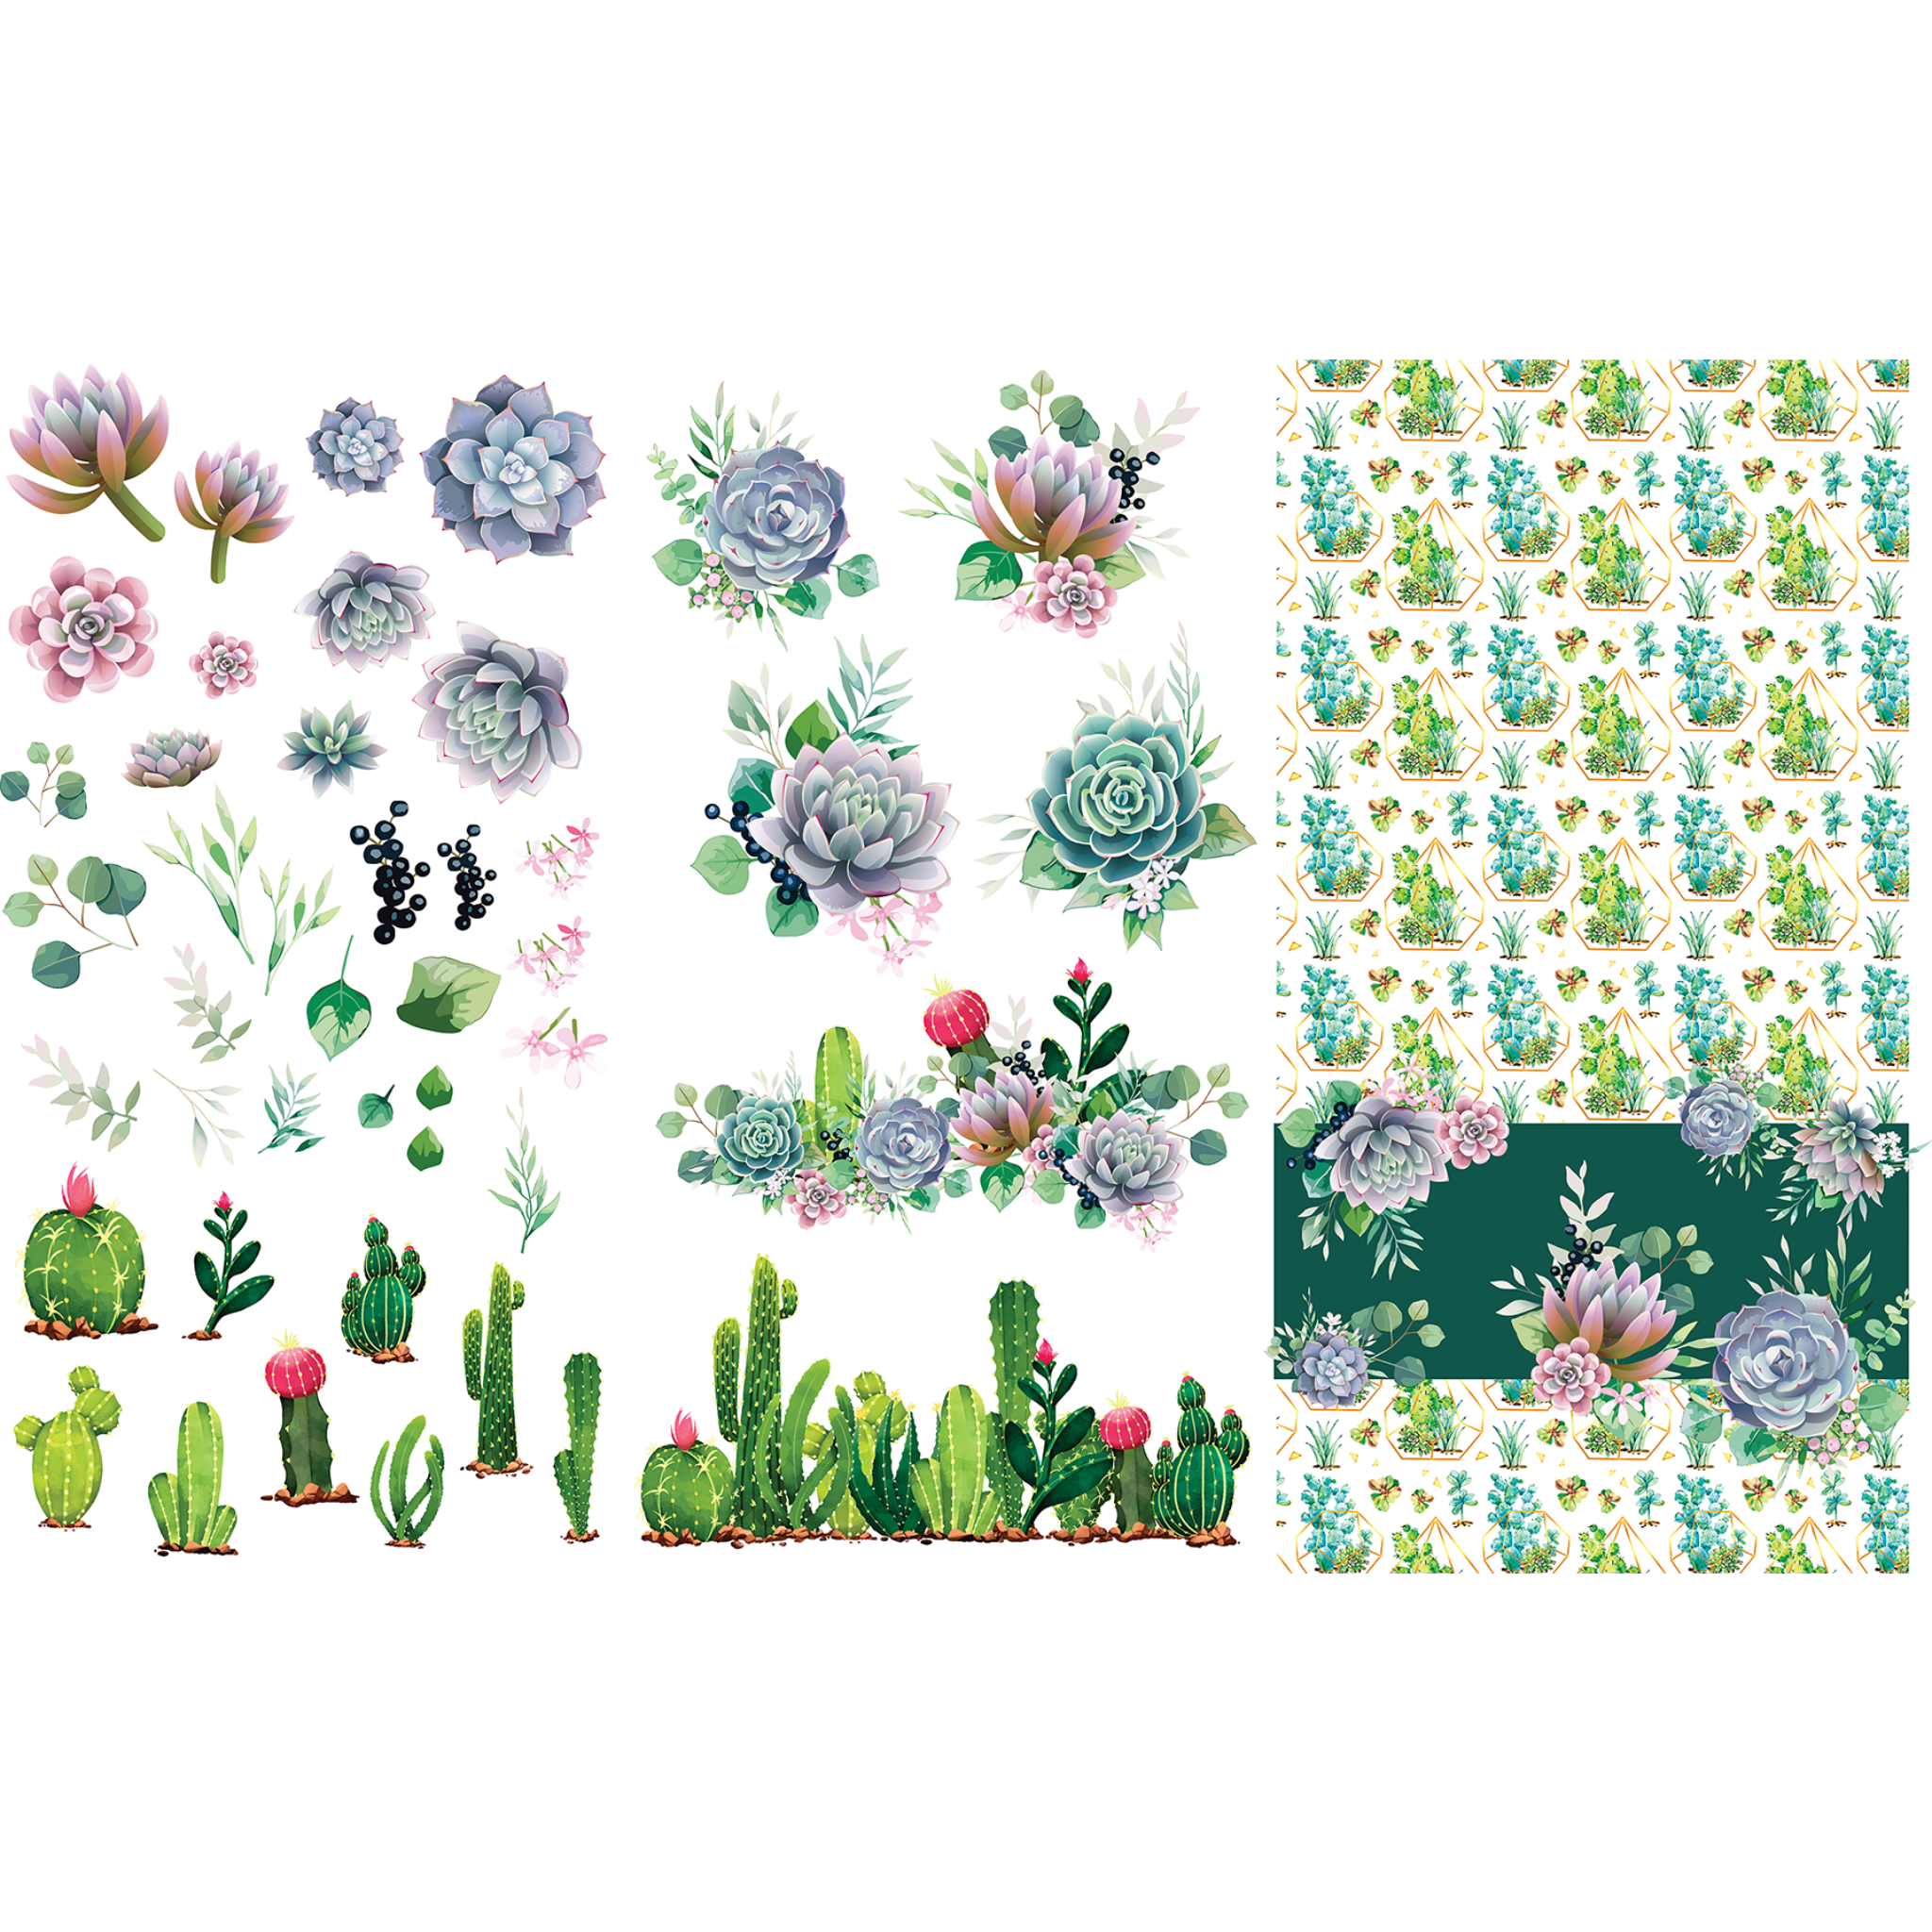 Rub-on transfer design against a white background that features soft pink and purple flower succulents, green cactus, and a repeating pattern of cactus bundles on the right.